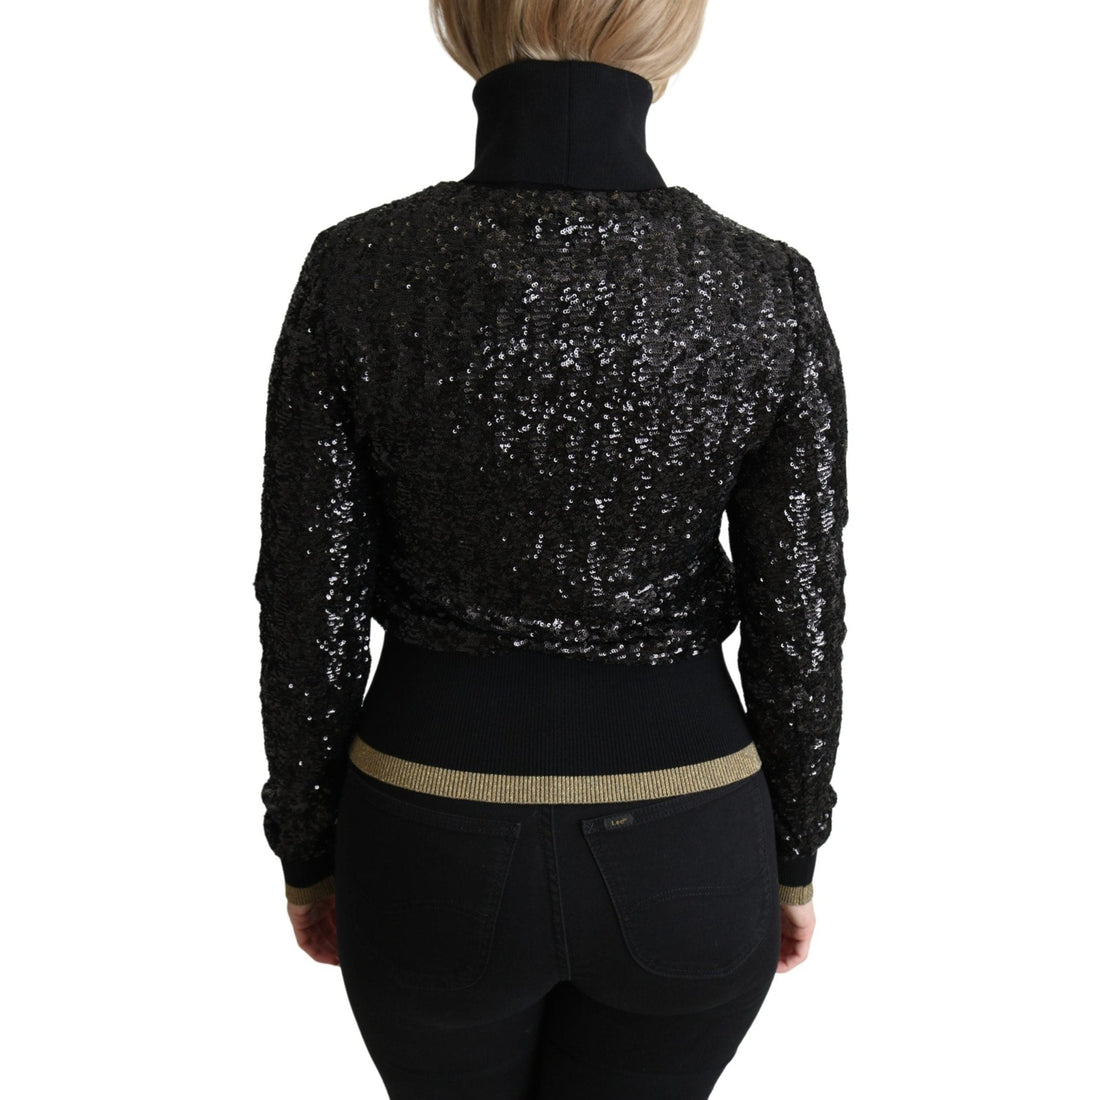 Dolce & Gabbana Black Sequined Knitted Turtle Neck Sweater - Paris Deluxe